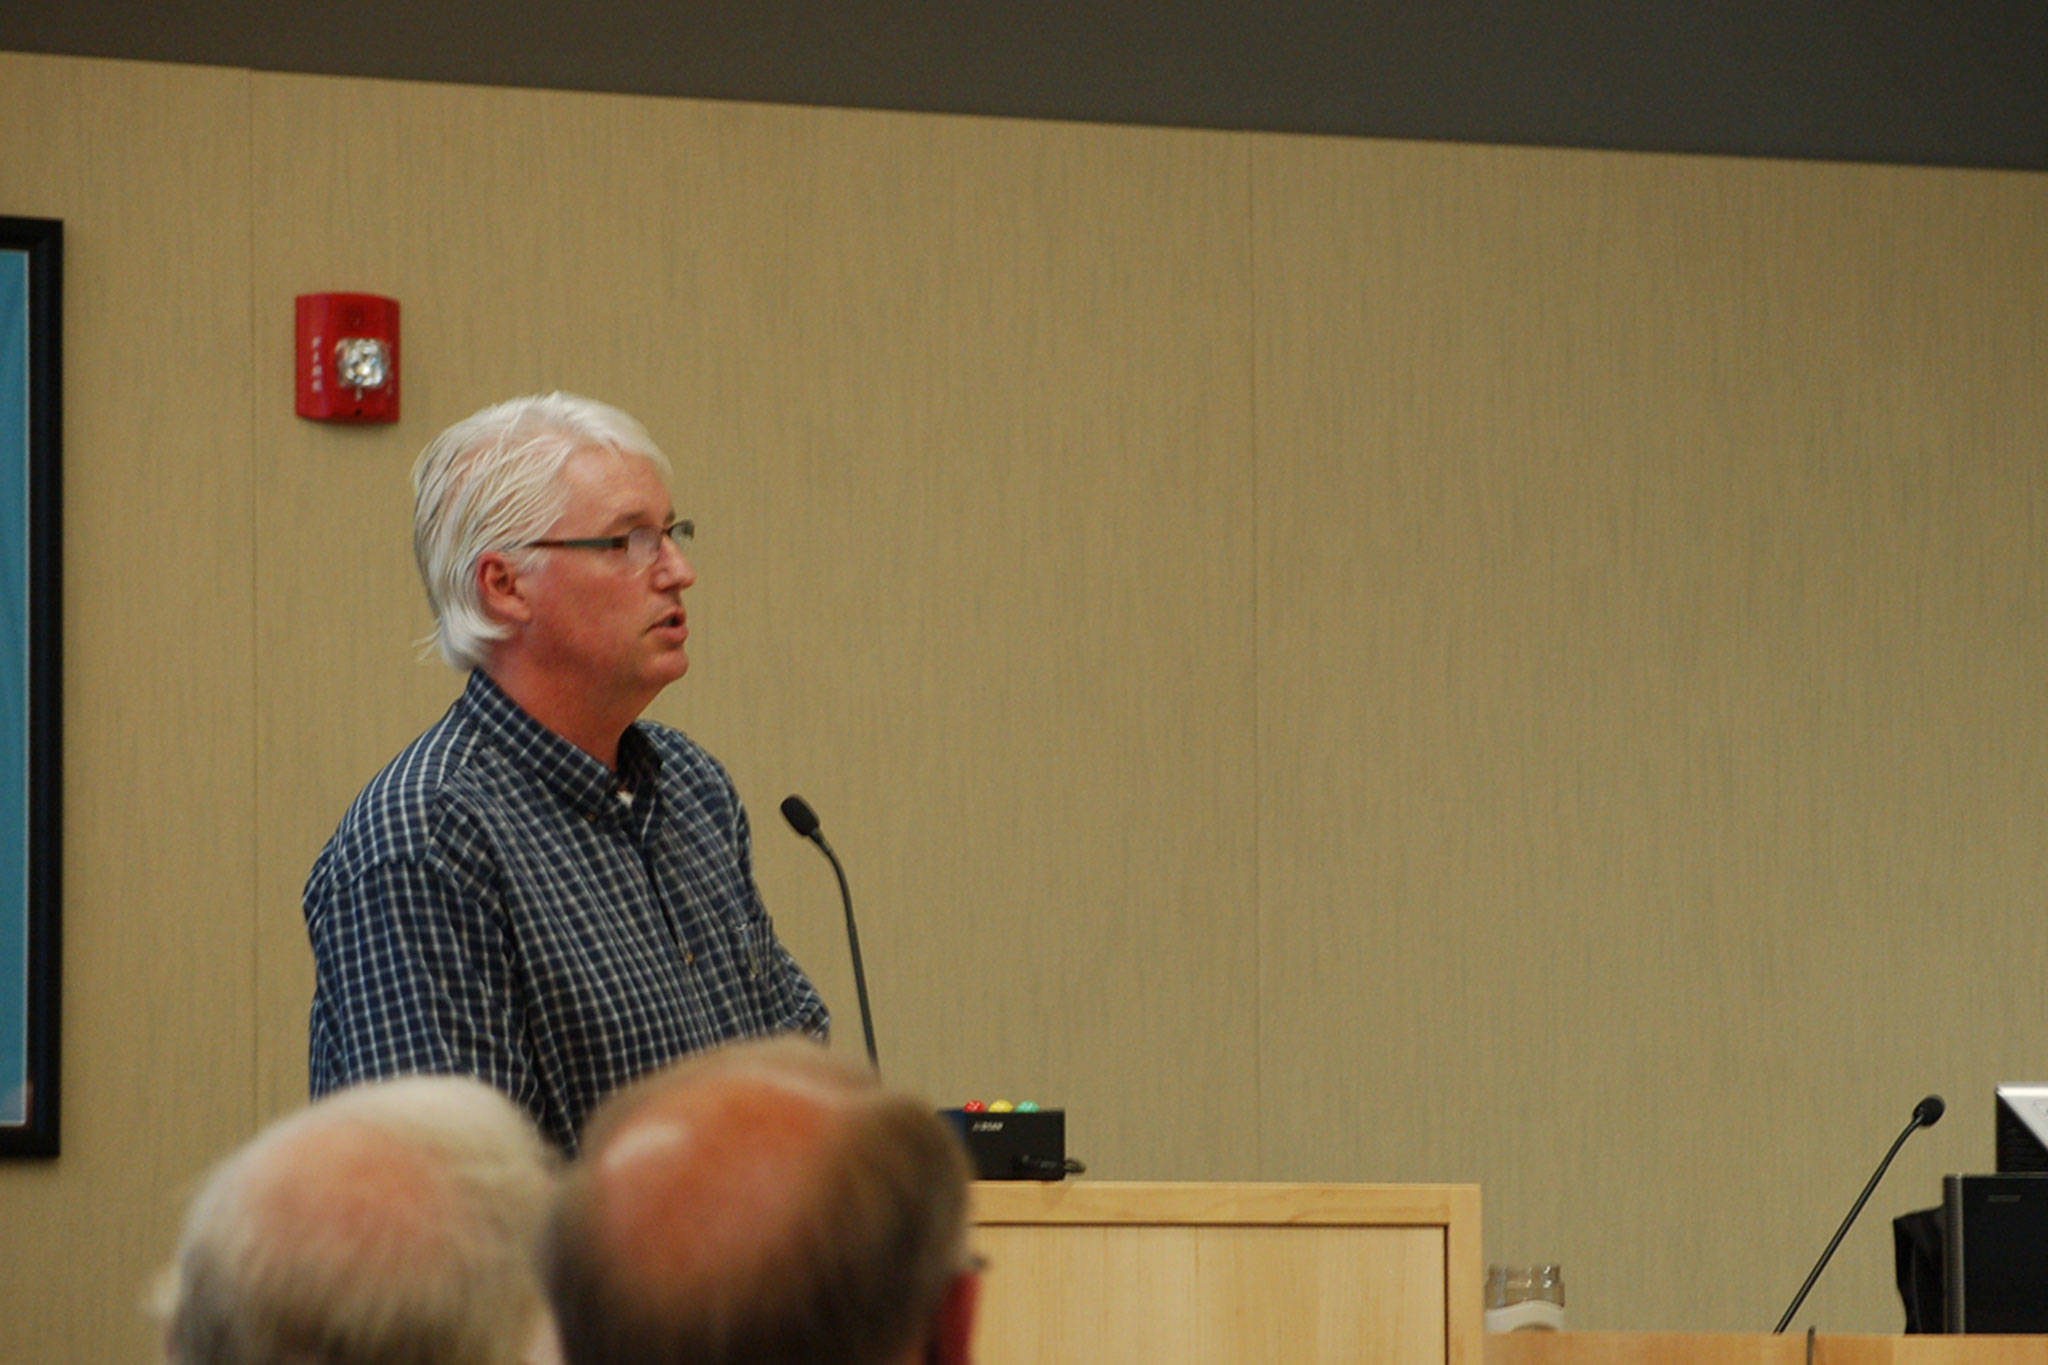 Neil Latta of Latta Engineering PLLC speaks Monday to the Sequim City Council about the Bell Hill Estates development. He said the development won’t adversely impact the Roosevelt elk and it will remain well under the needed amount for traffic provisions. (Erin Hawkins/Olympic Peninsula News Group)